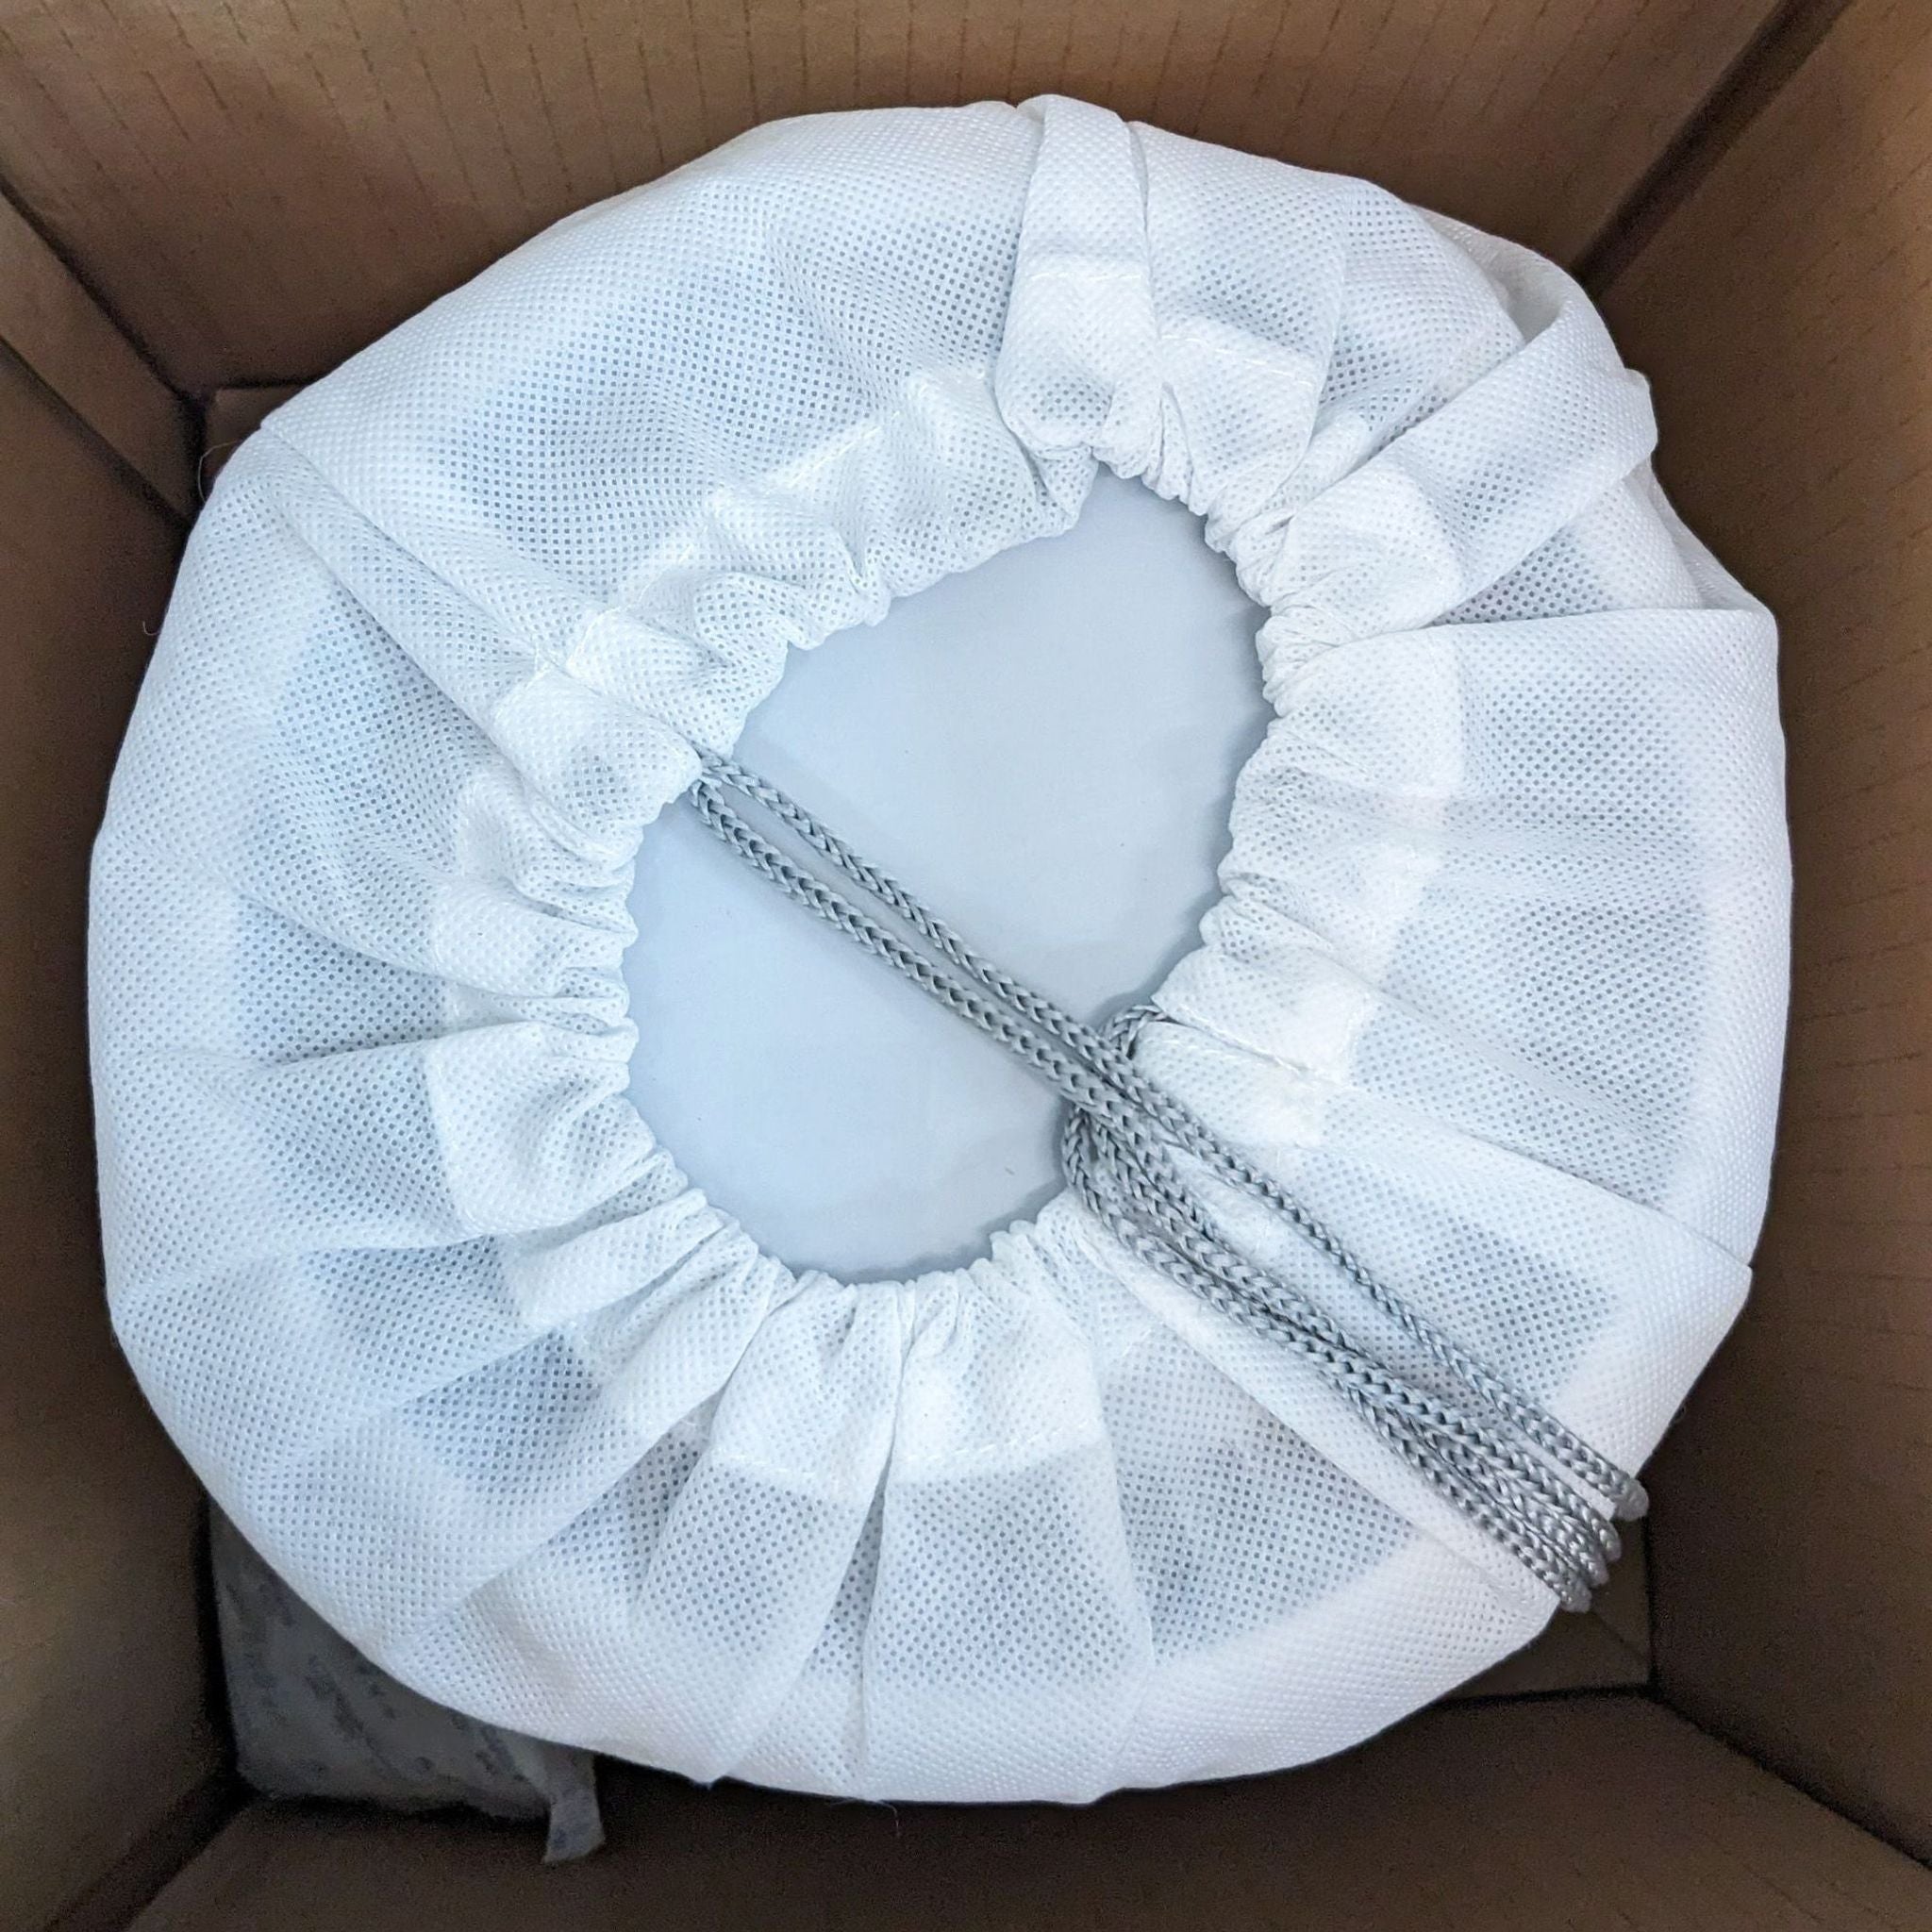 Air purifier pre-filter inside a cardboard box, showing white fabric and elastic edge.